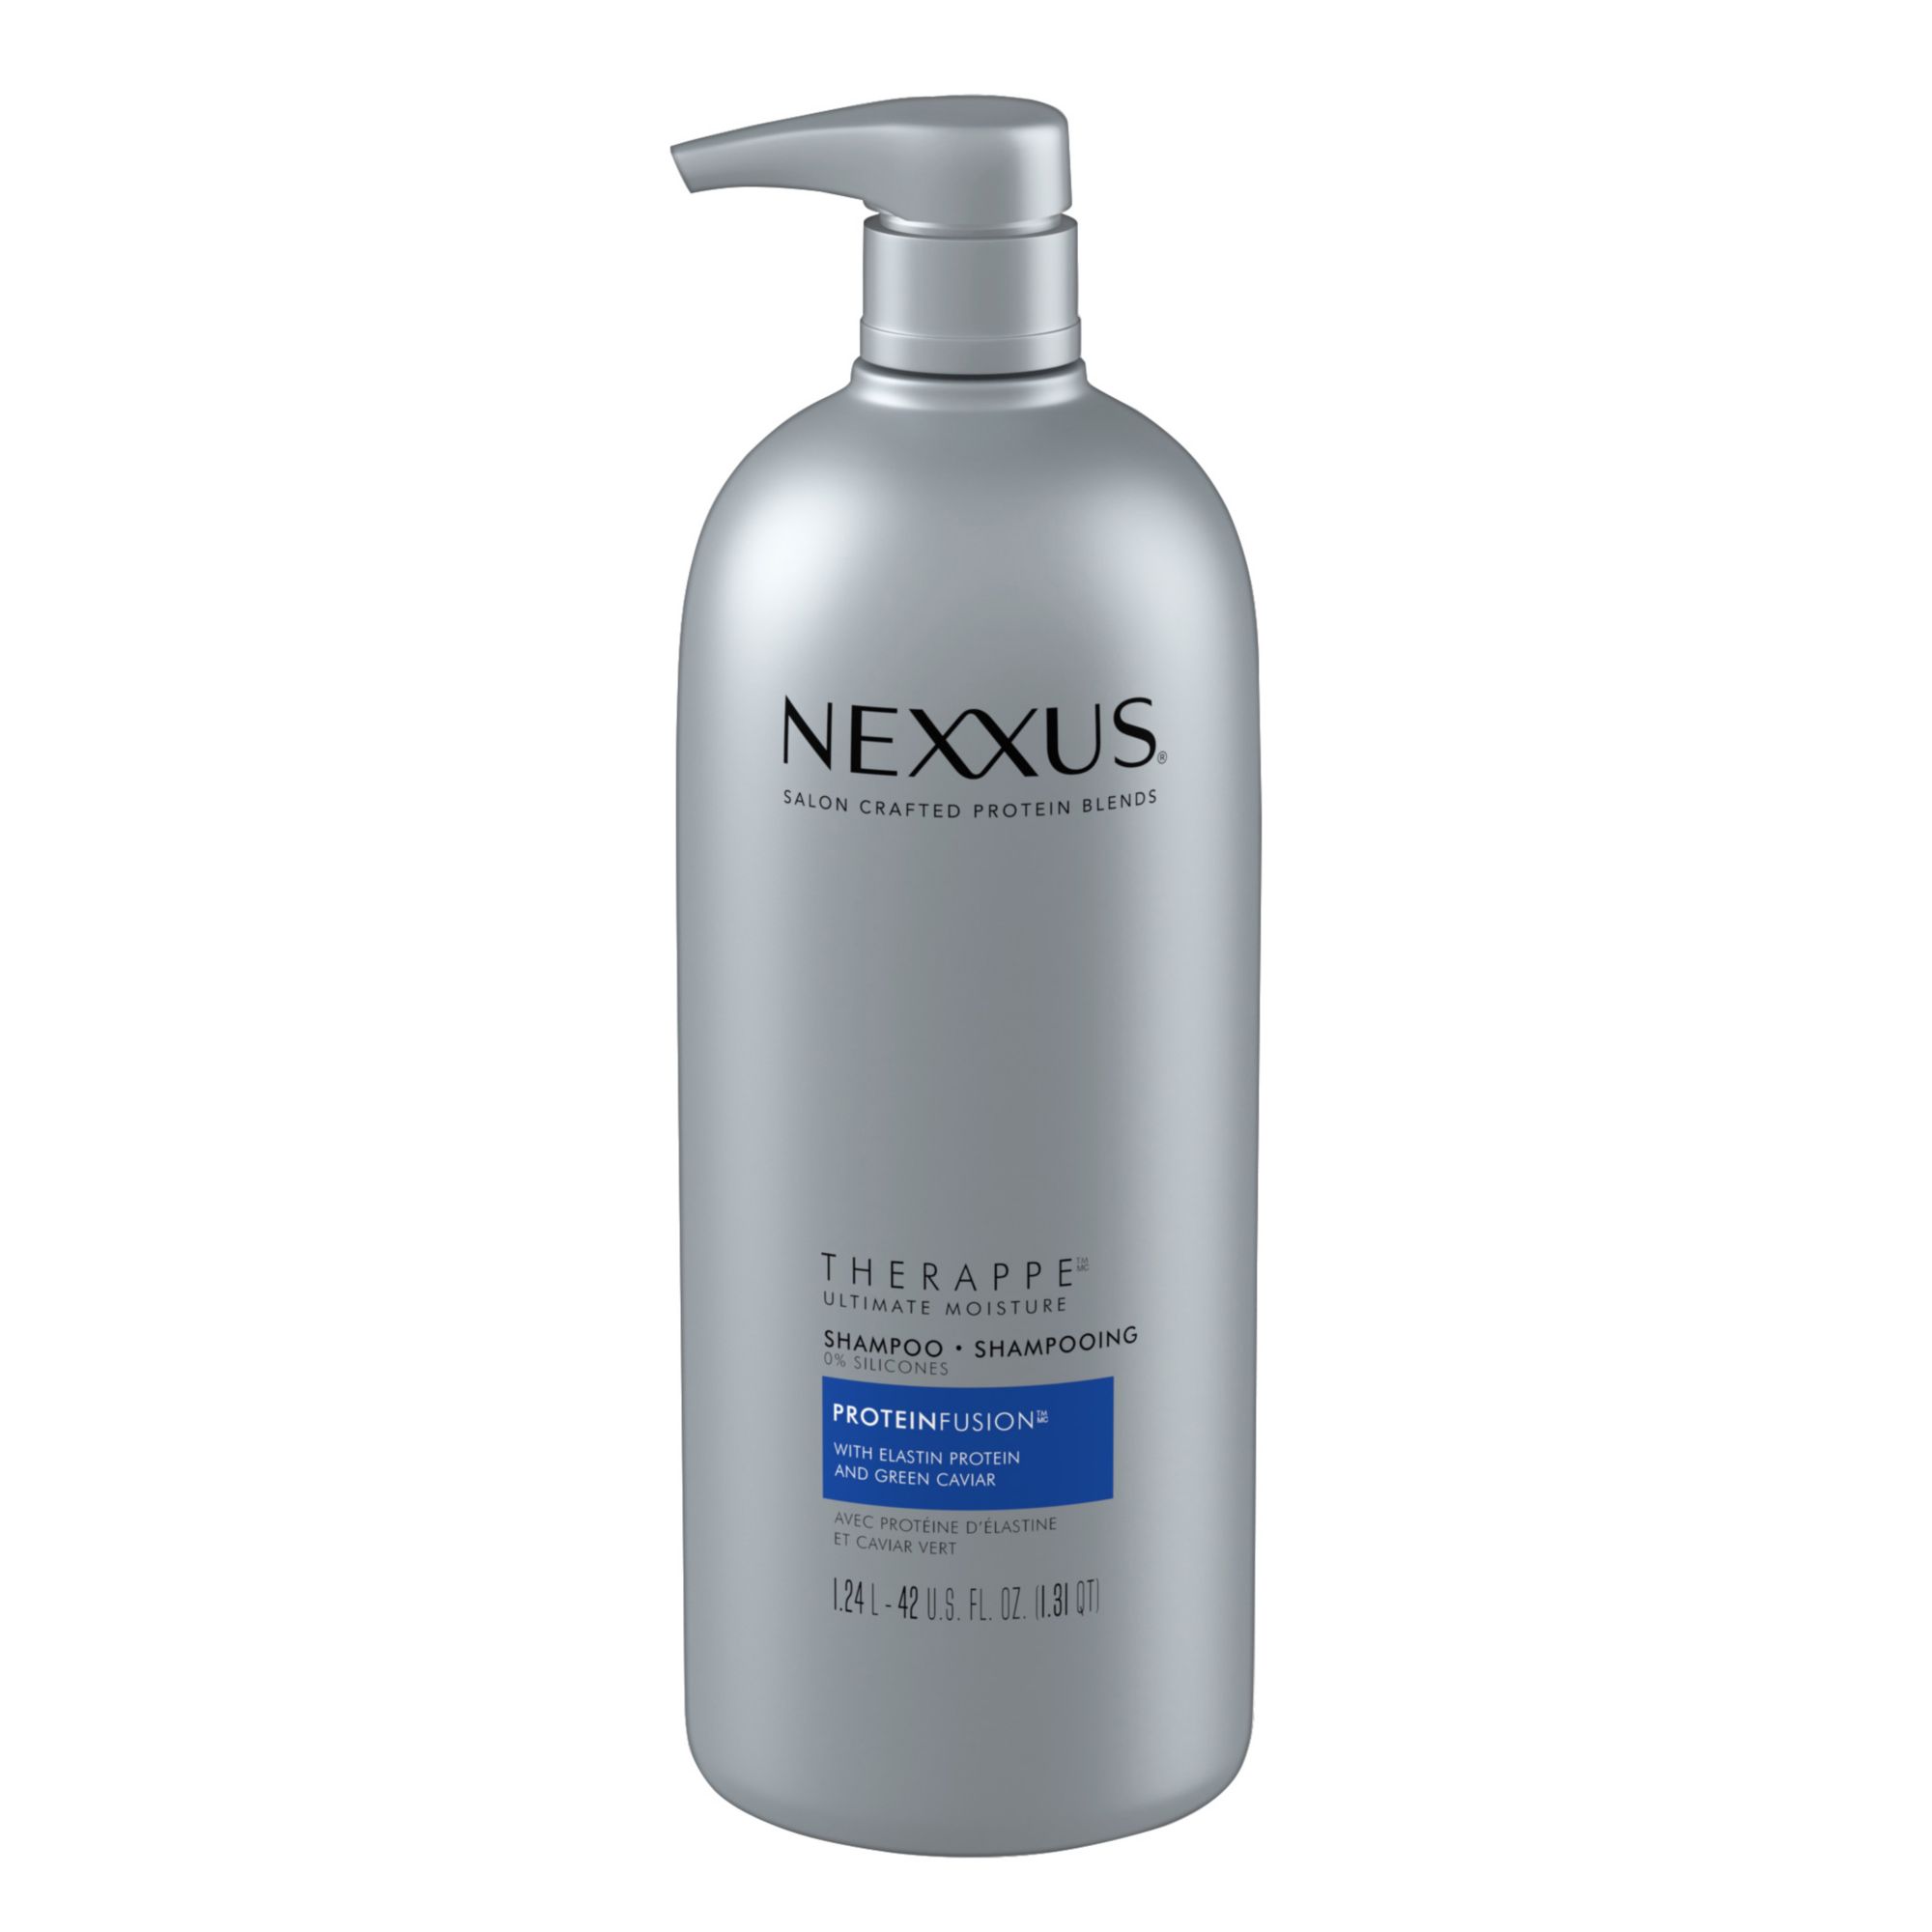 Nexxus Therappe Shampoo and Humectress Conditioner Review